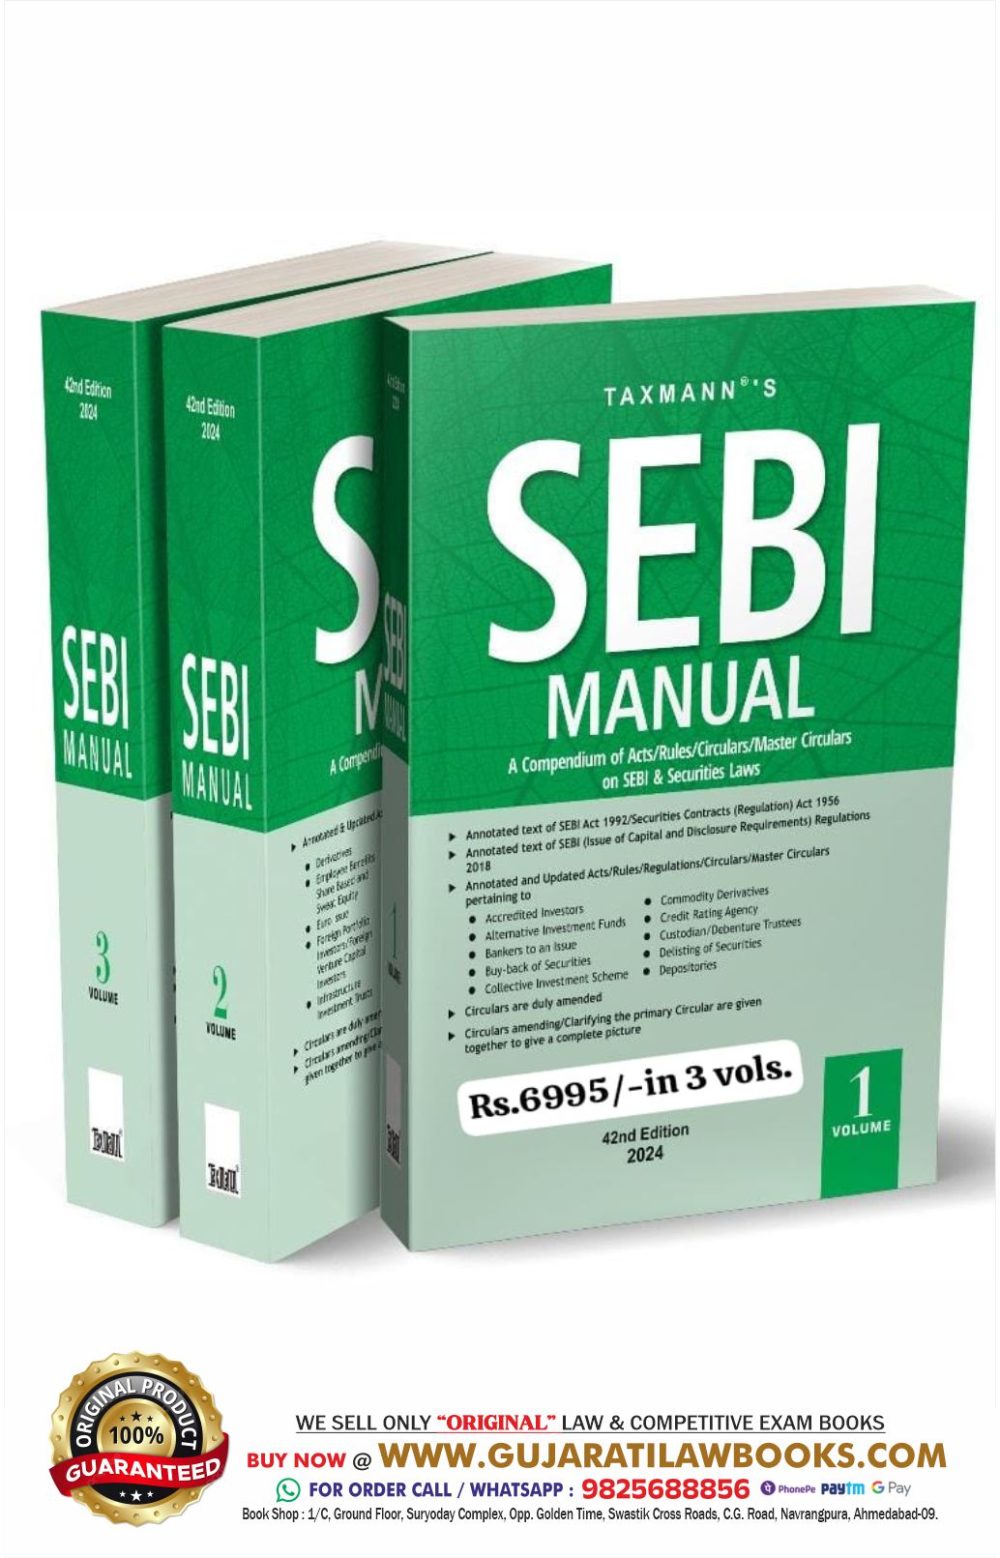 SEBI Manual (Set of 3 Vols.) – Compendium of the Annotated text of Acts, 70+ Rules-Regulations, 650+ Circulars-Notifications, 30+ Master Circulars, etc., - Latest 42nd Edition 2024 Taxmann